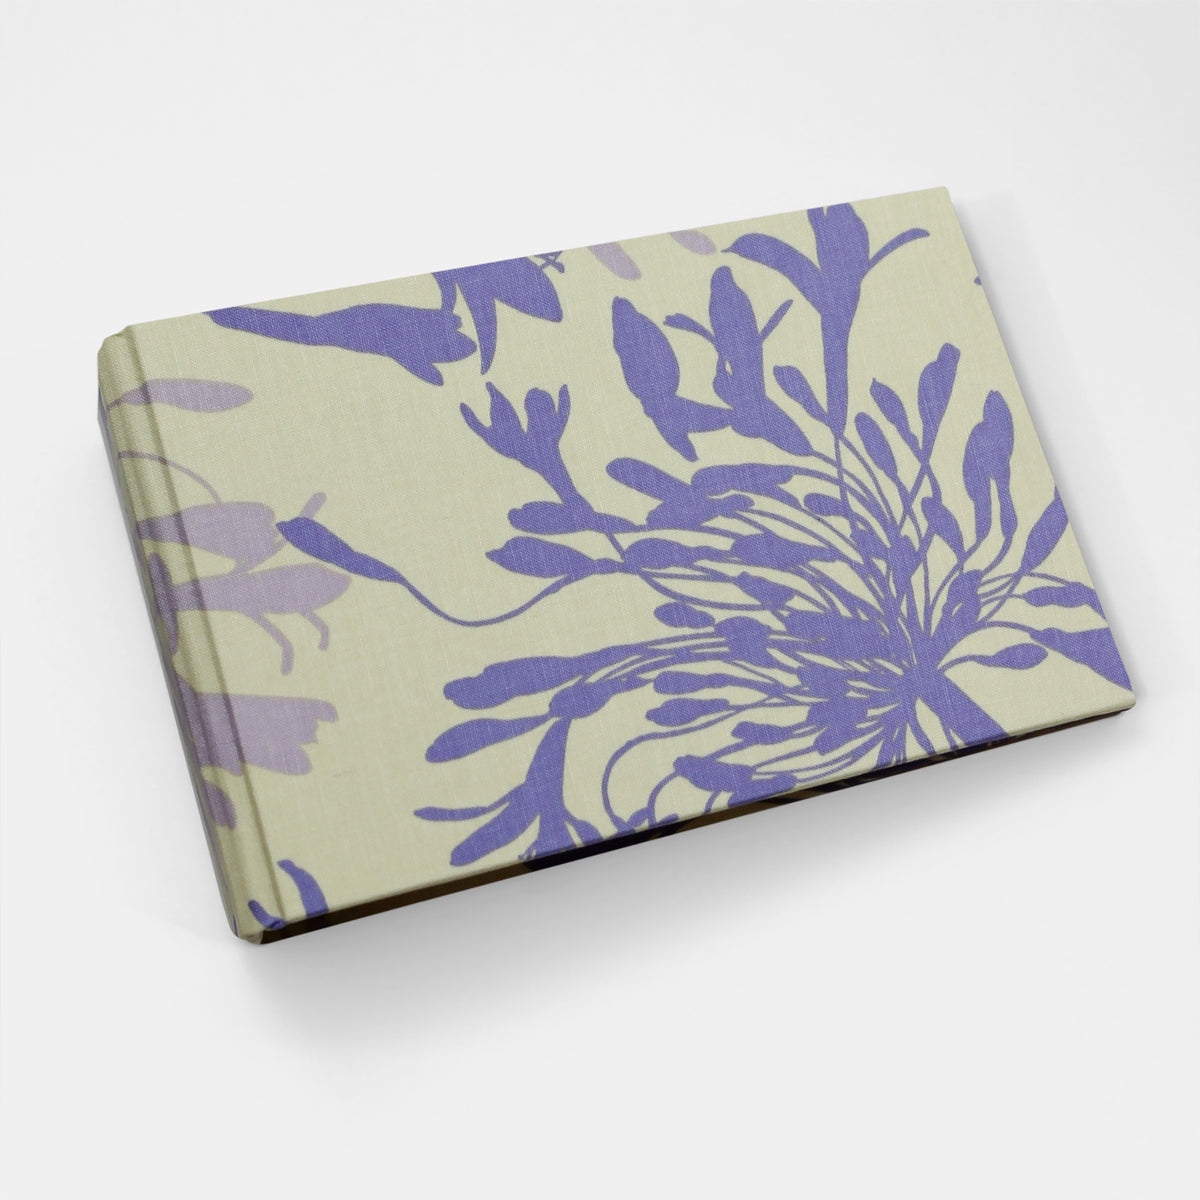 Small Photo Binder | for 4x6 Photos | with Lilac Bloom Fabric Cover